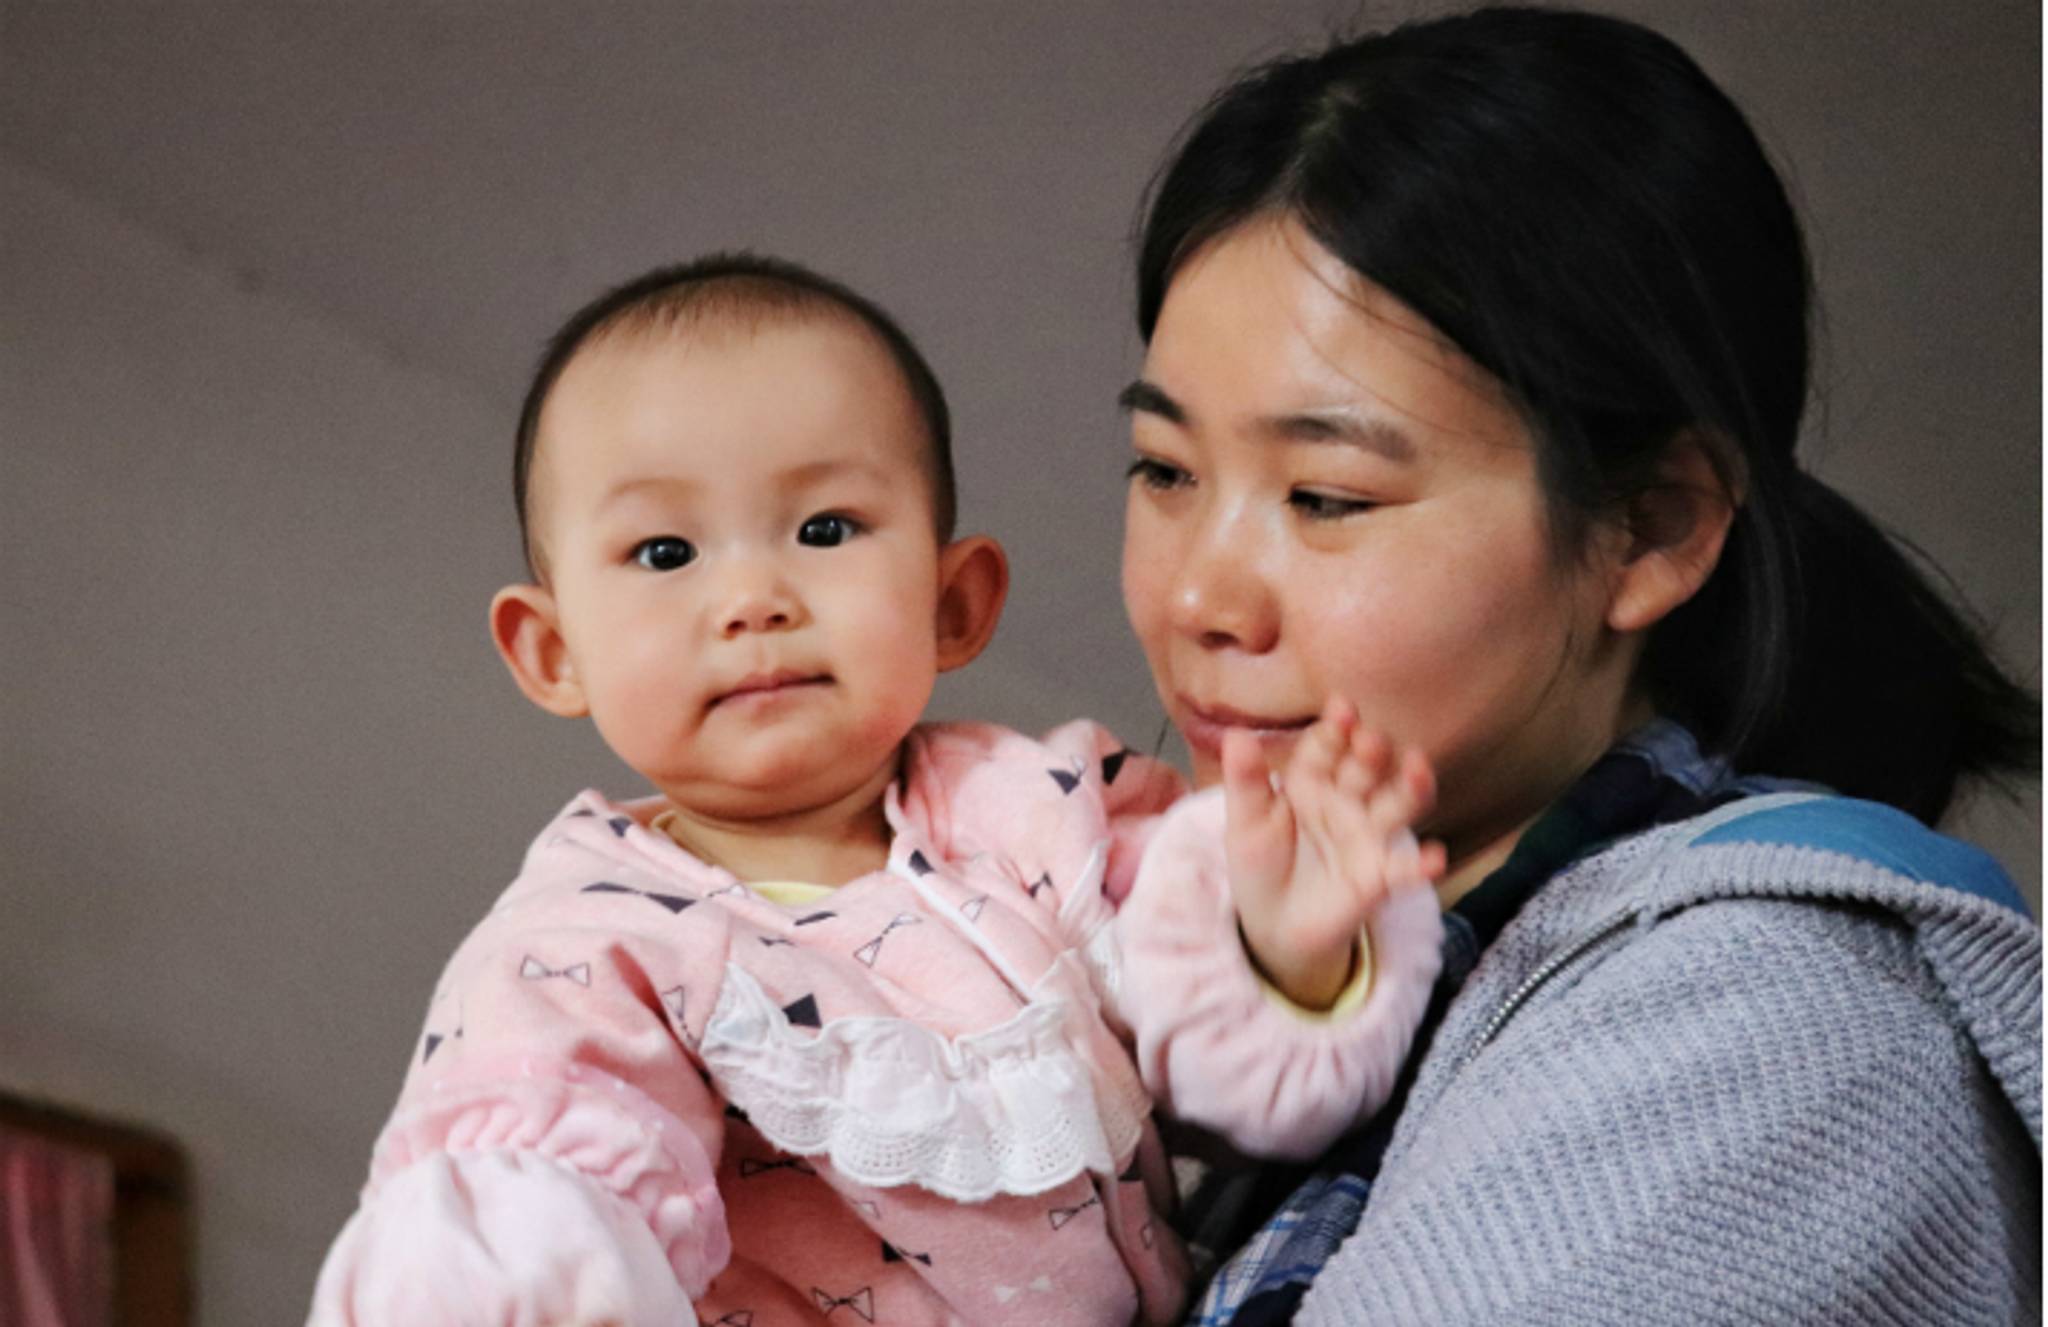 Older Chinese women are driving fertility boom